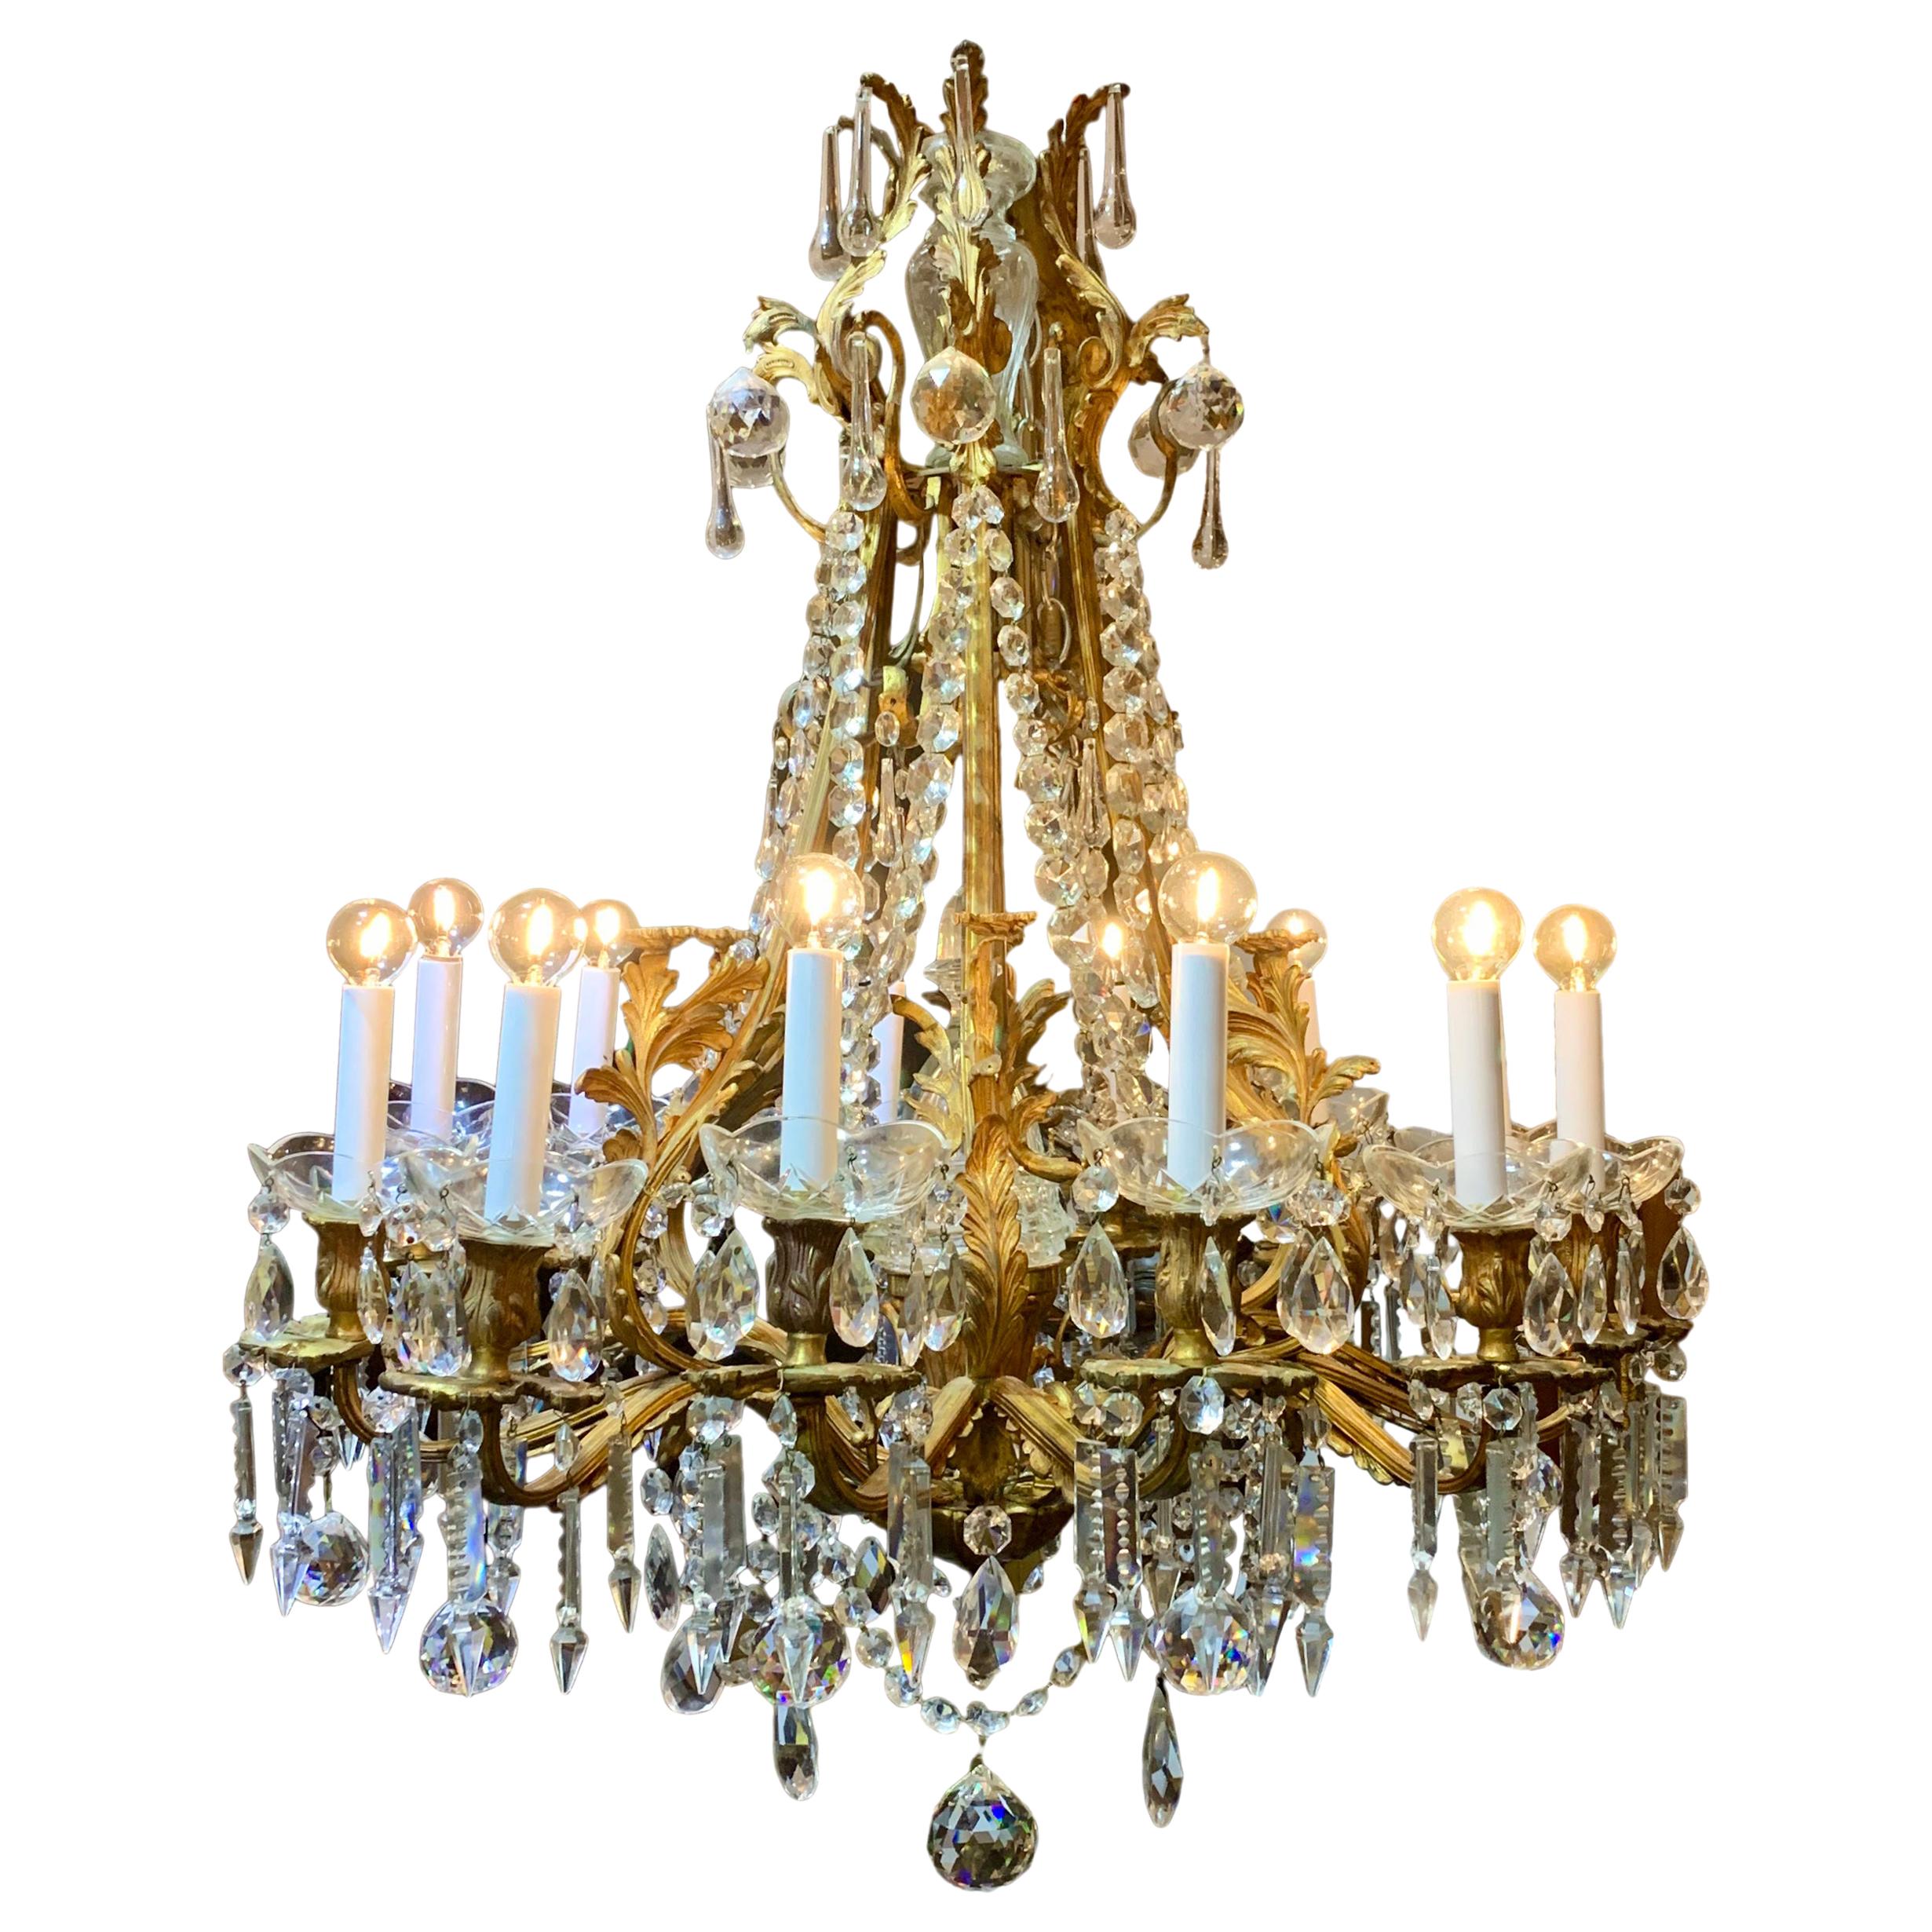 19th century French ormolu and crystal Marie Antoinette chandelier